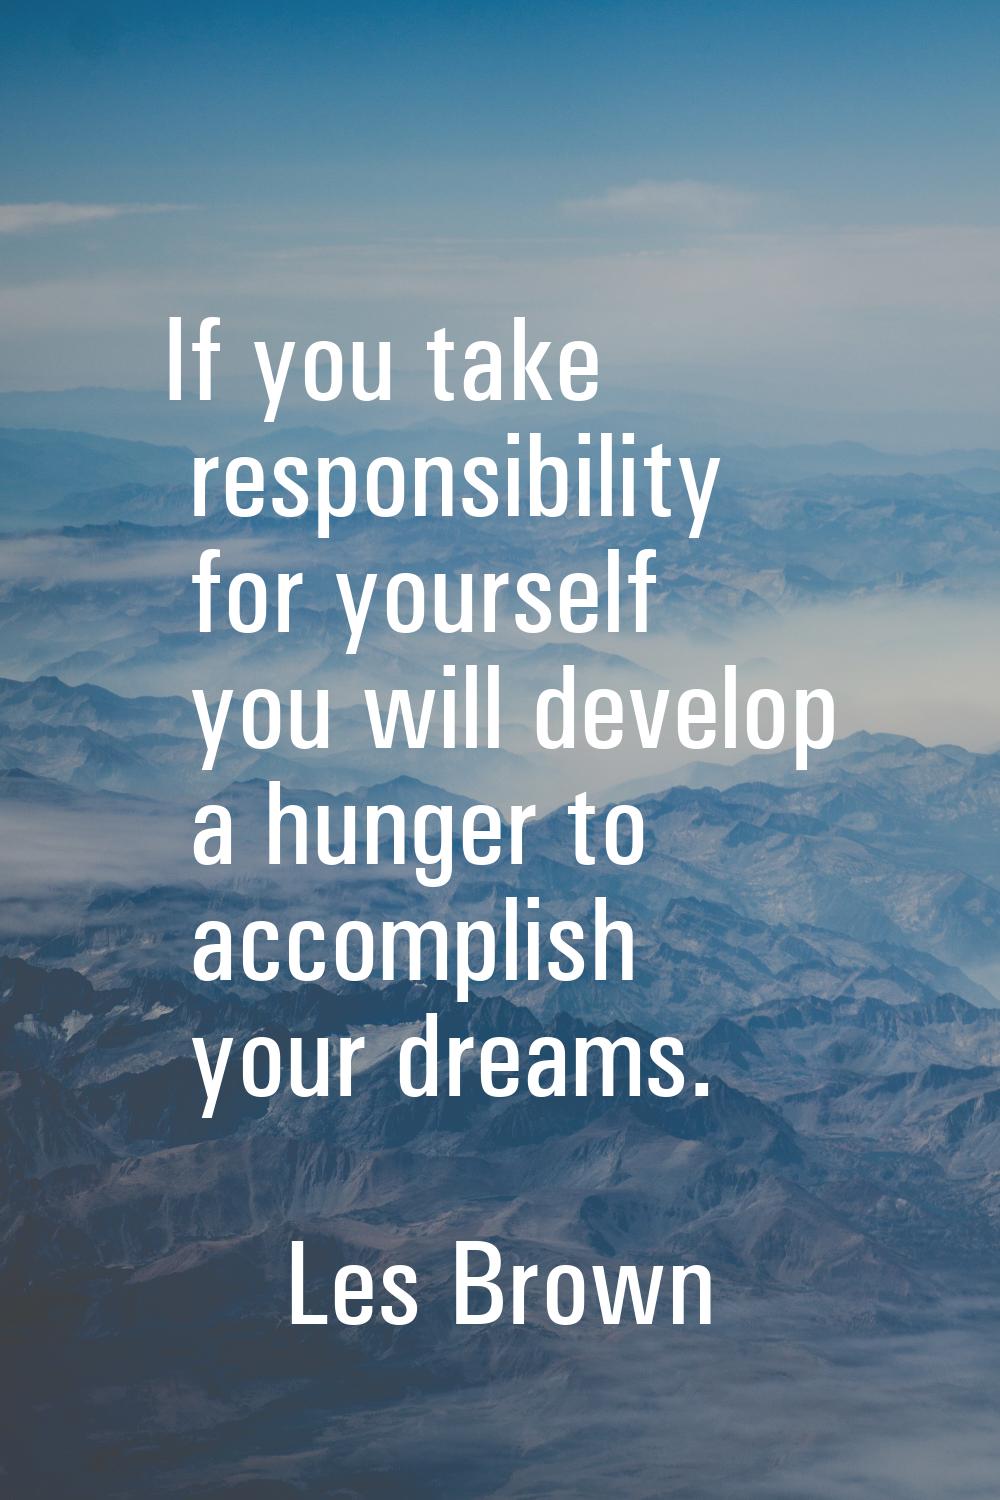 If you take responsibility for yourself you will develop a hunger to accomplish your dreams.